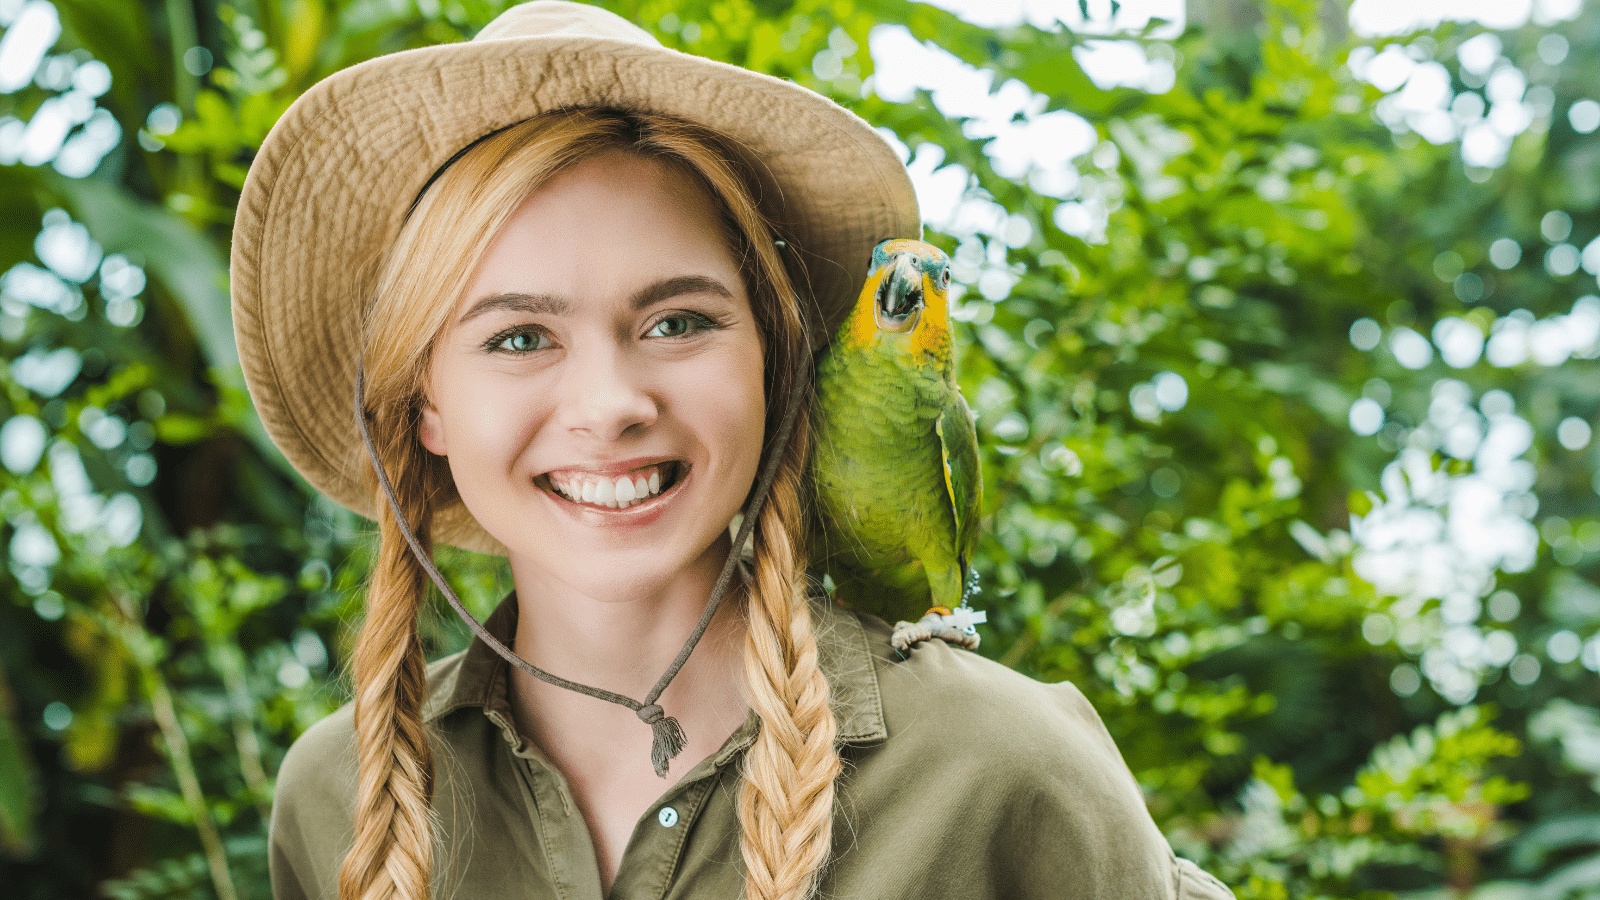 A women with pigtail braids, and a big smile on her face, wearing a green shirt and safari hat, in the jungle with a green and yellow parrot on her shoulder.